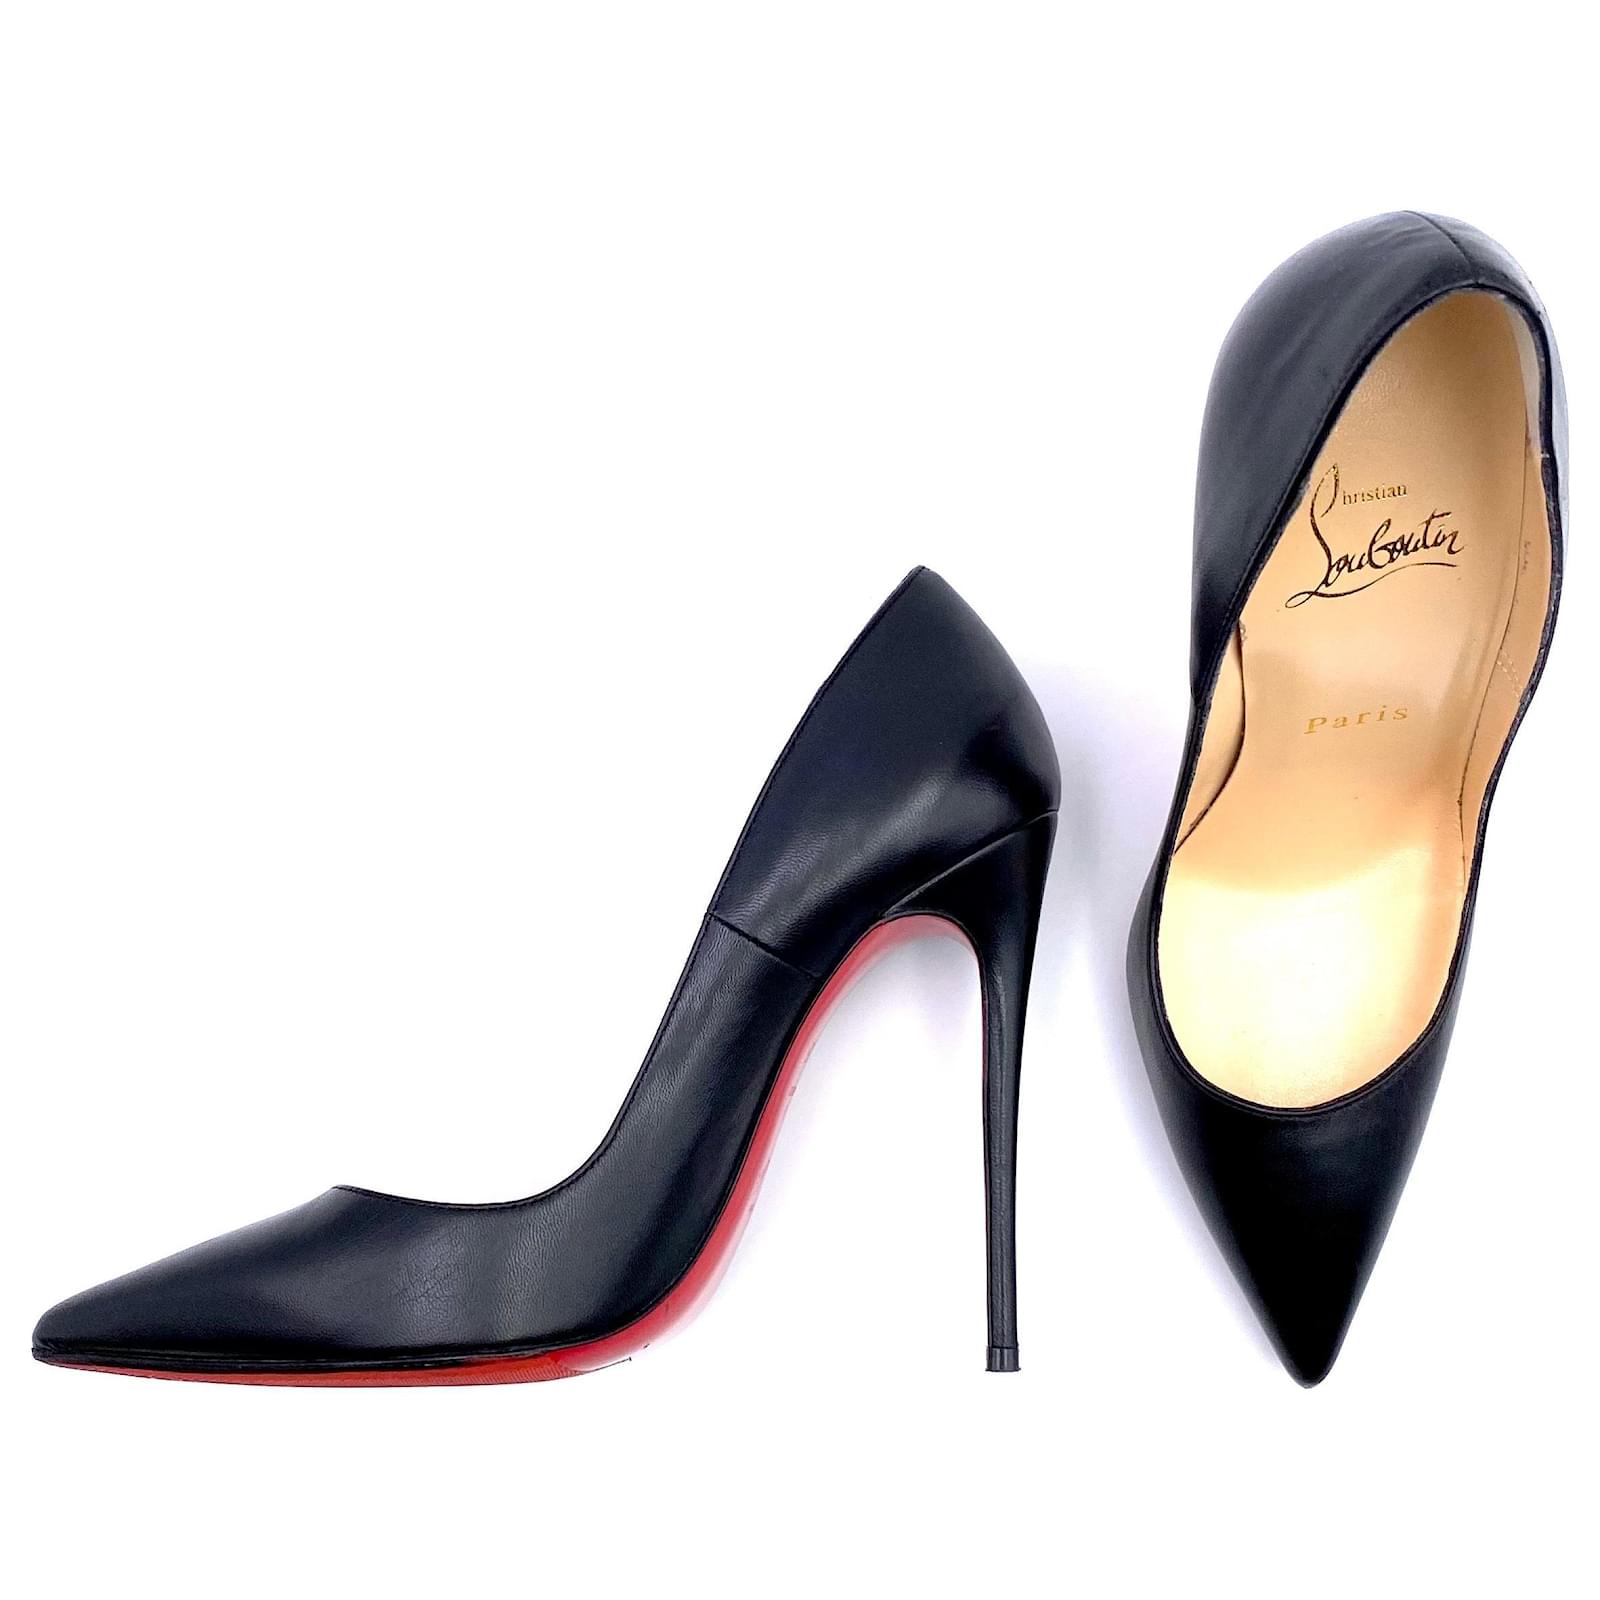 The Classic Of Christian Louboutin High Heels